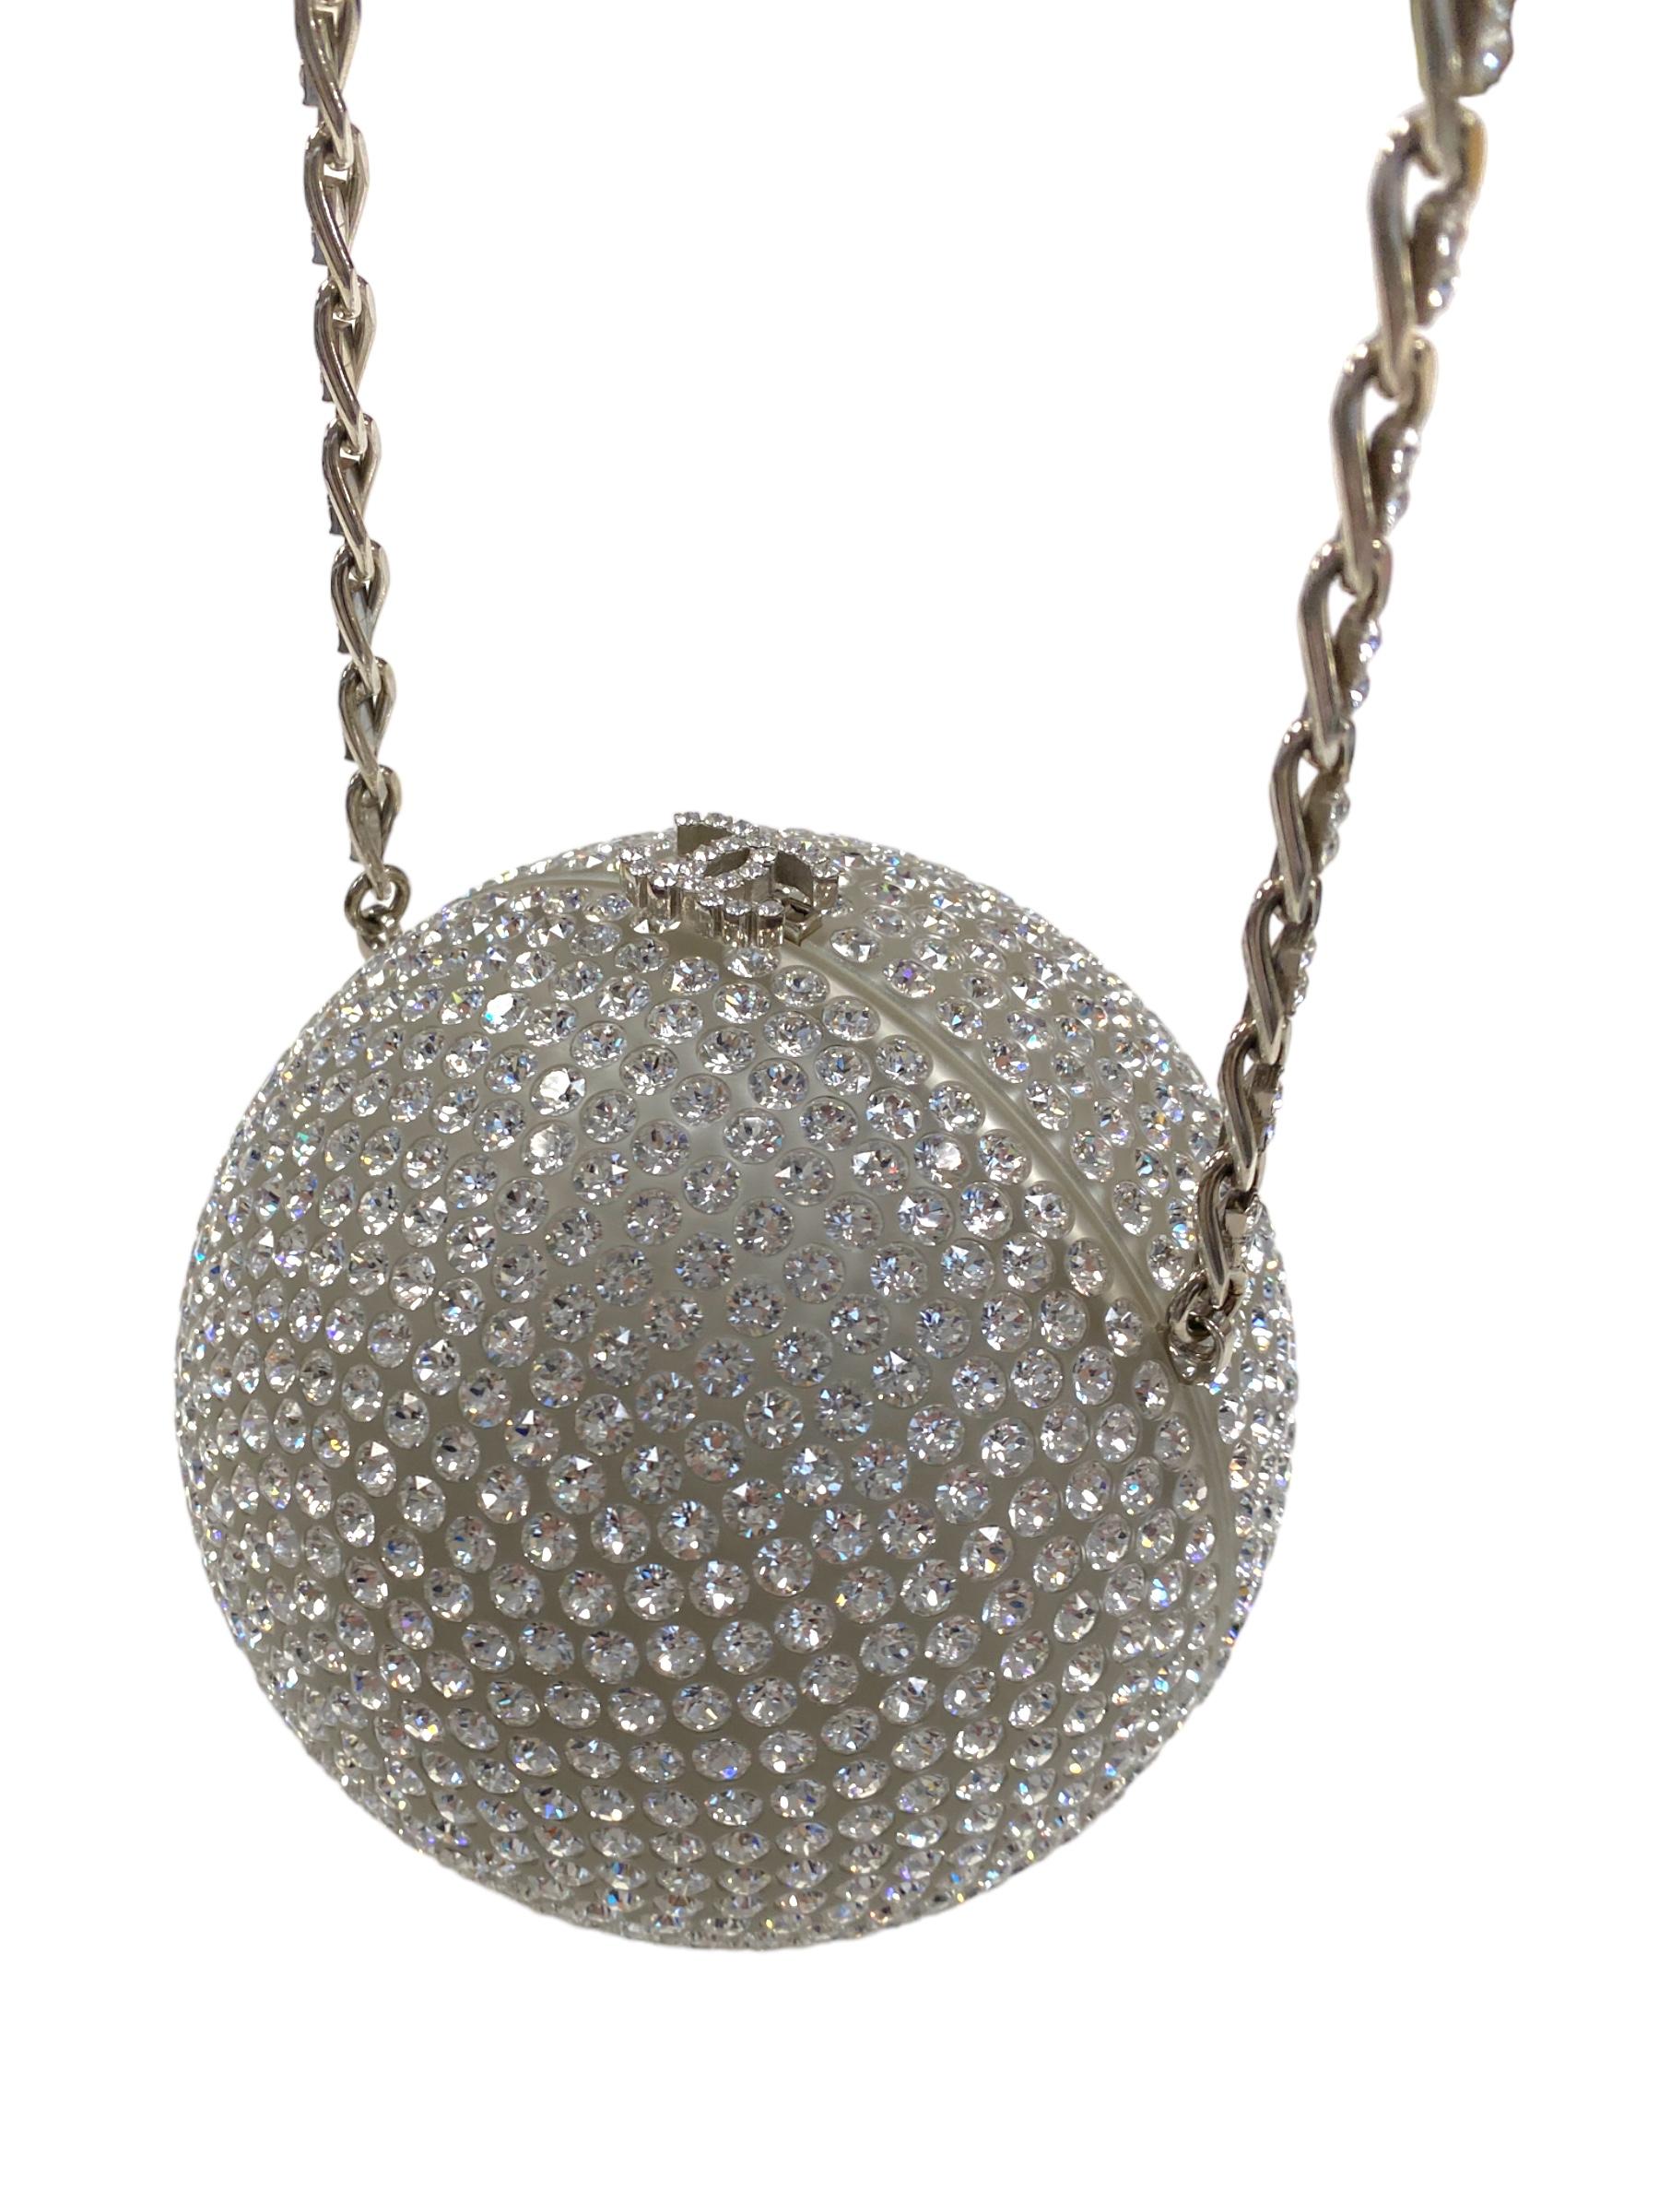 Chanel Minaudière Limited Edition Crystal Ball Evening Clutch 7